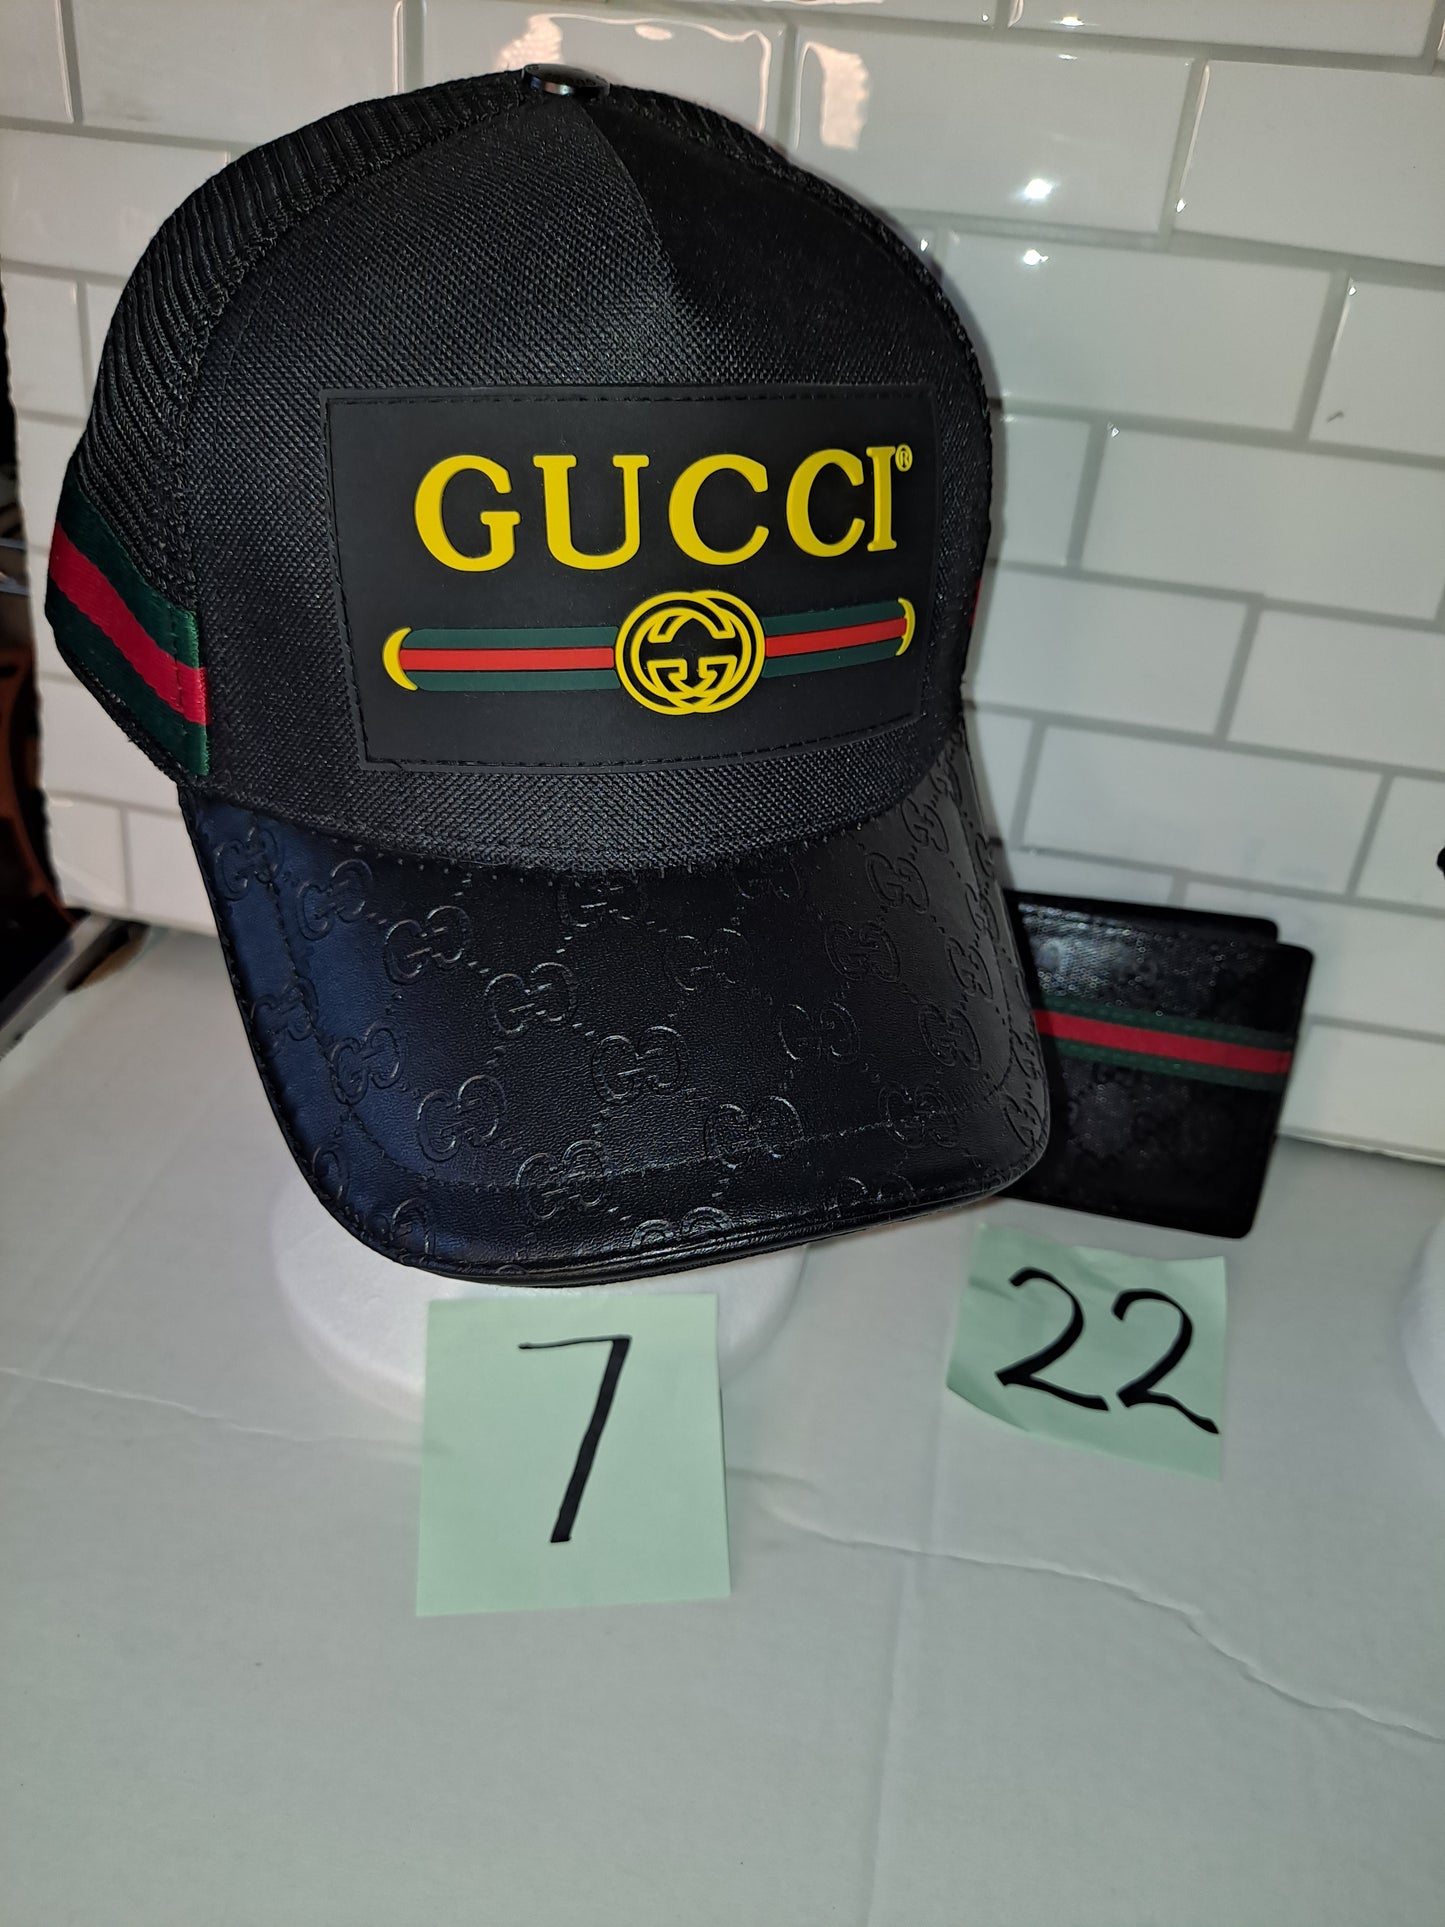 GG EVERYTHING HAT, HAT, or WALLET